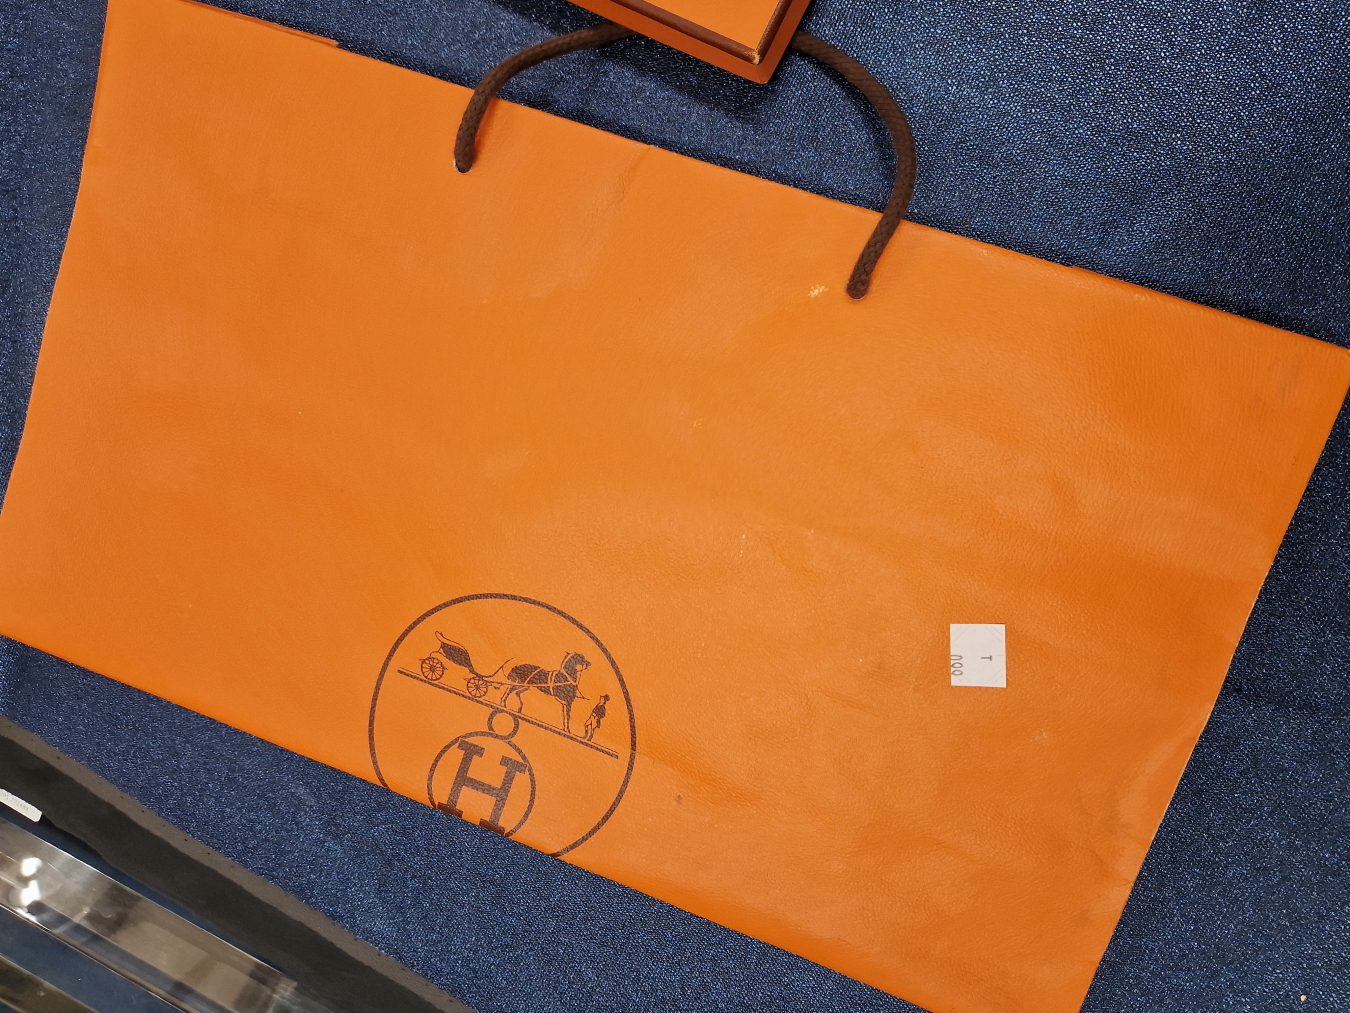 HERMES. A SILK LADIES SCARF. BOXED AND WITH ORIGINAL HERMES BAG. - Image 5 of 6